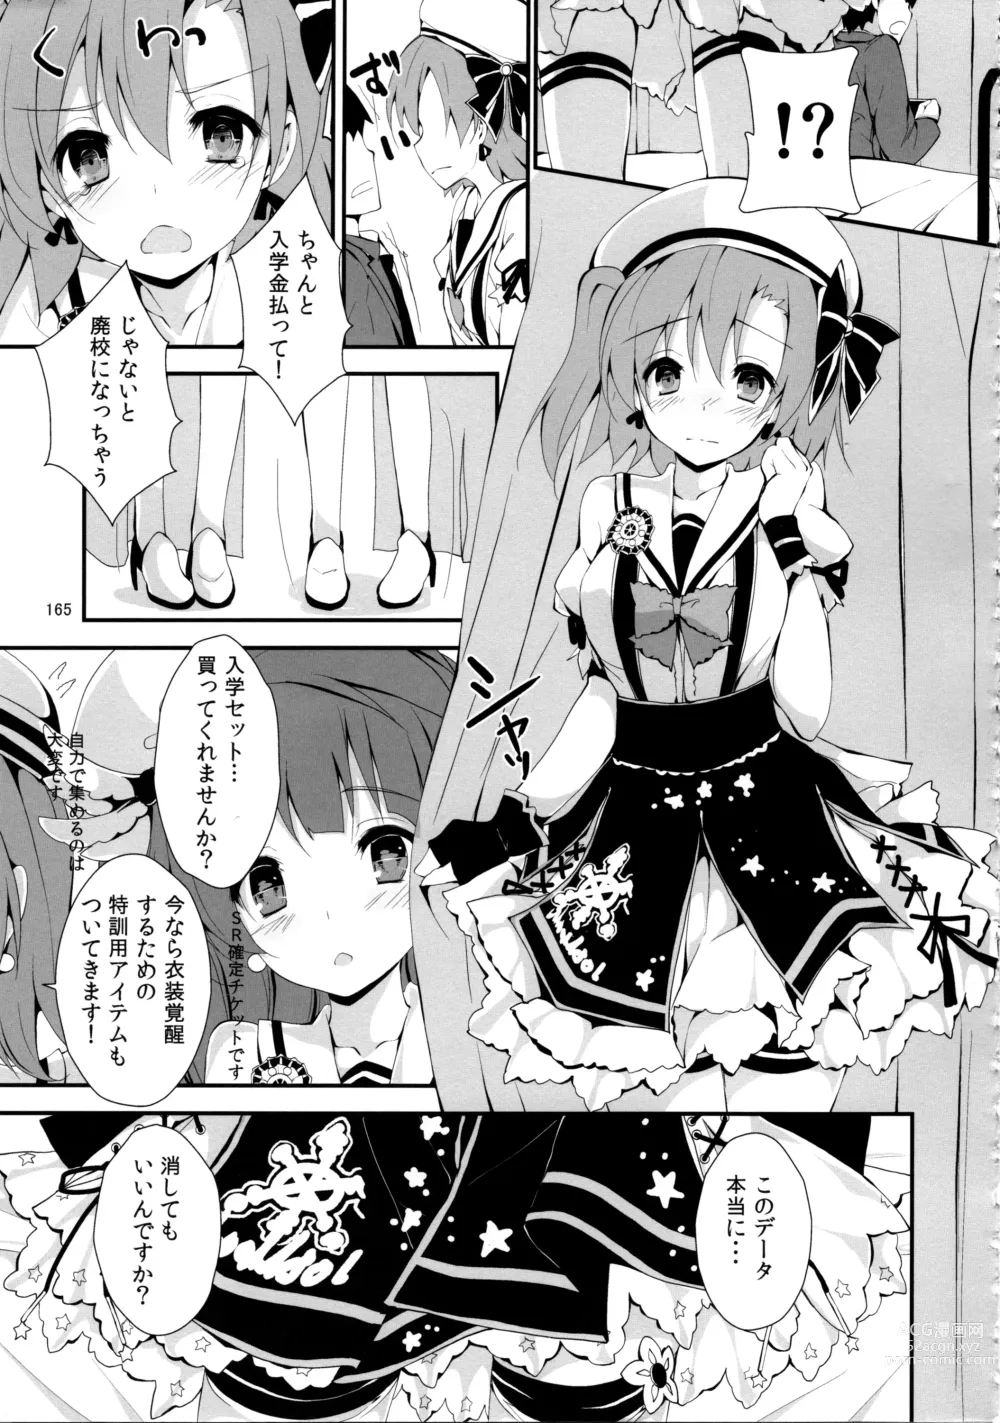 Page 168 of doujinshi Elo Live! collection IV